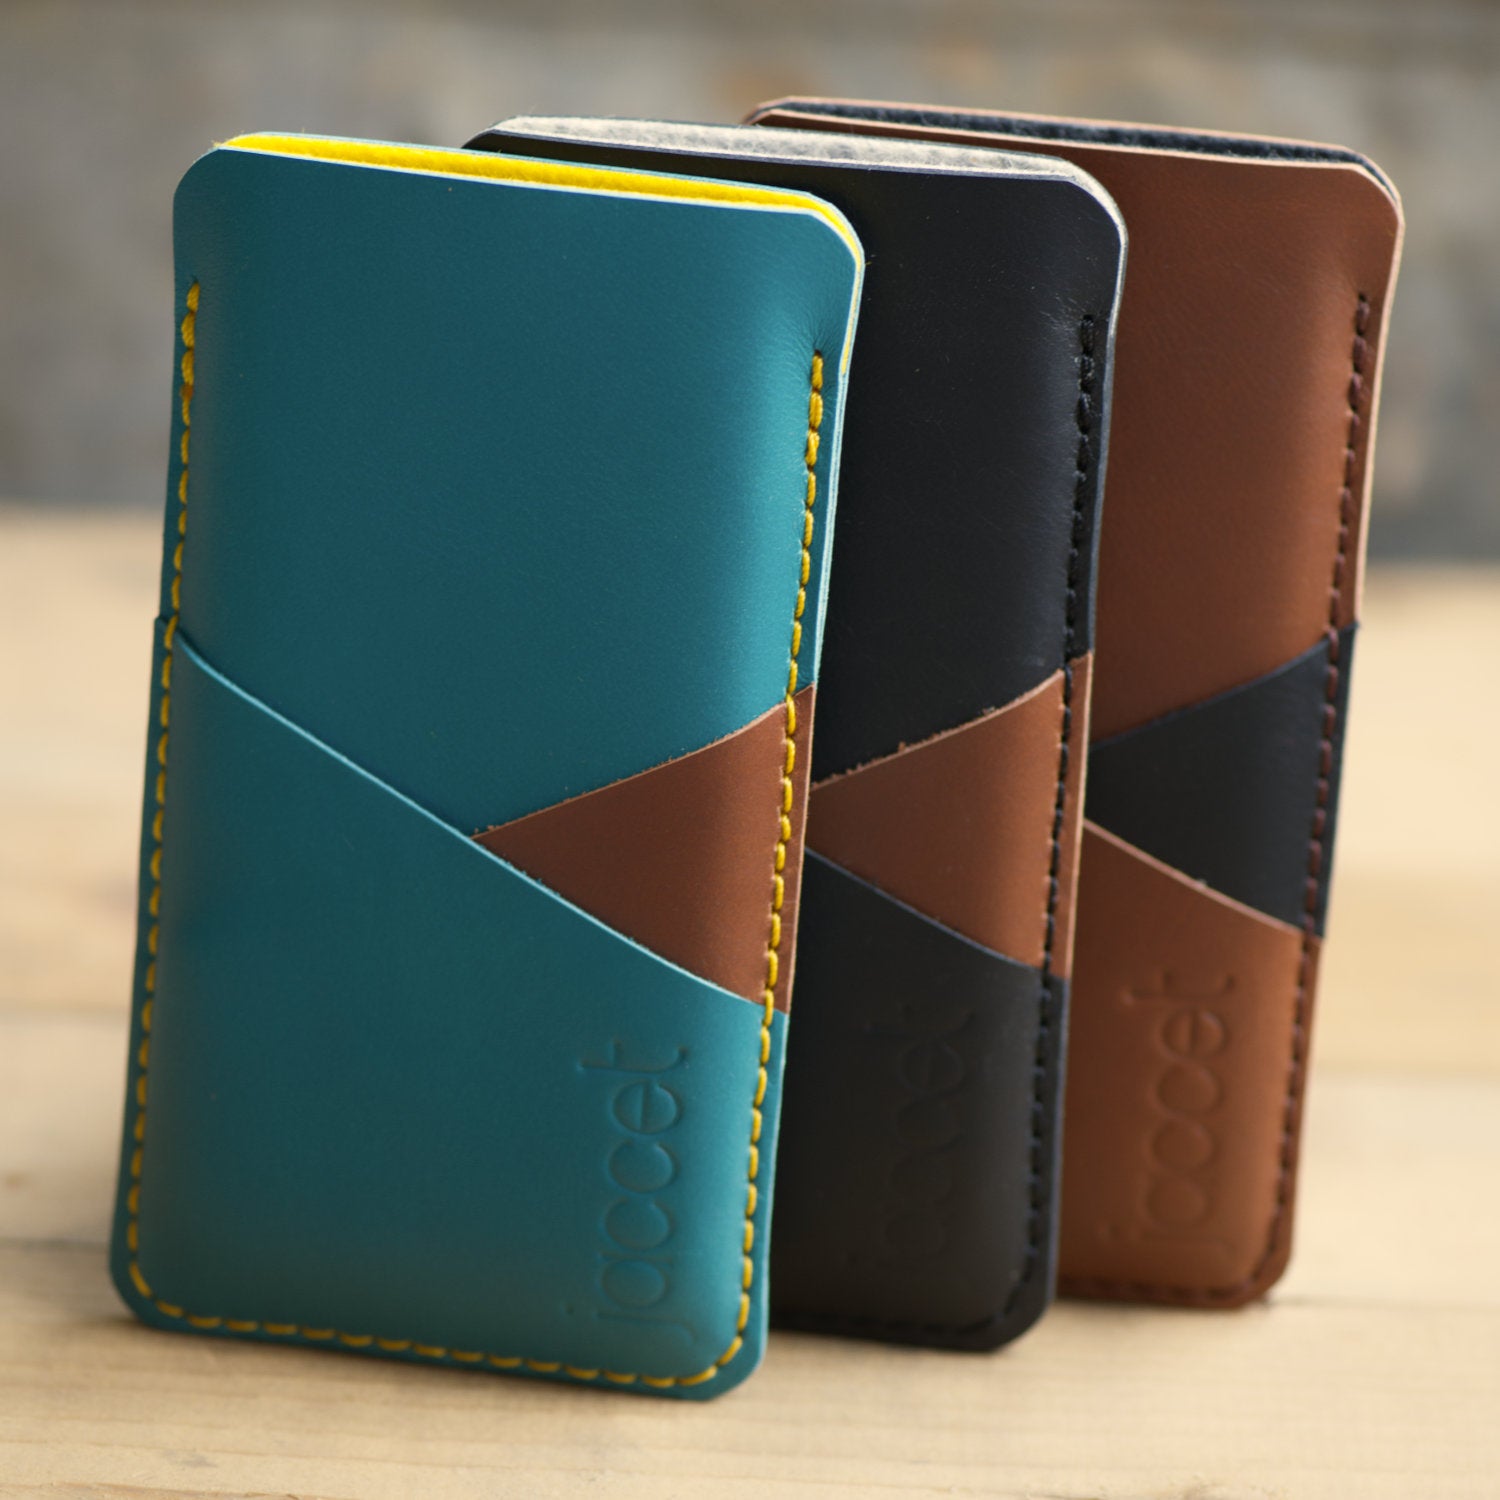 Full-grain leather iPhone sleeve - Turquoise leather with two pockets for cards